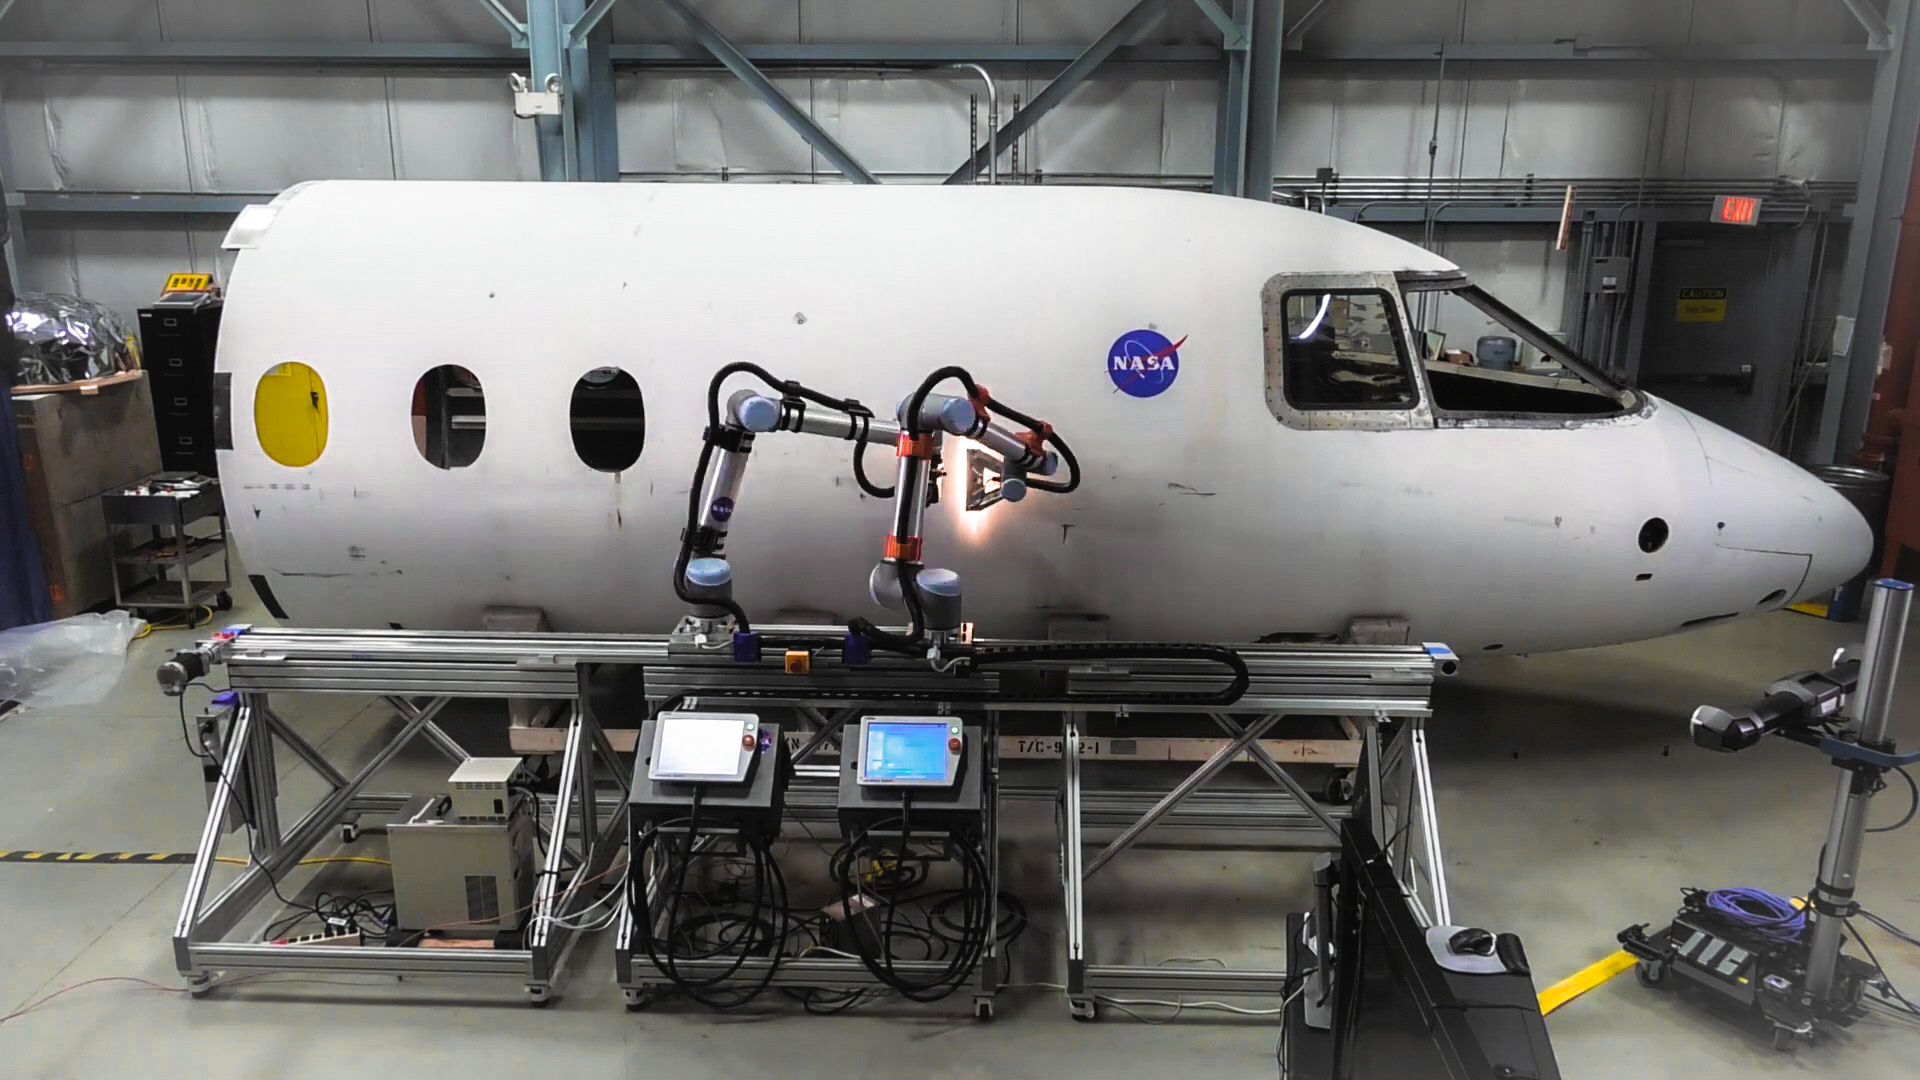 gøre ondt kedelig blanding Robotics in Aerospace: What's Possible for Aerospace Companies - RoboDK blog